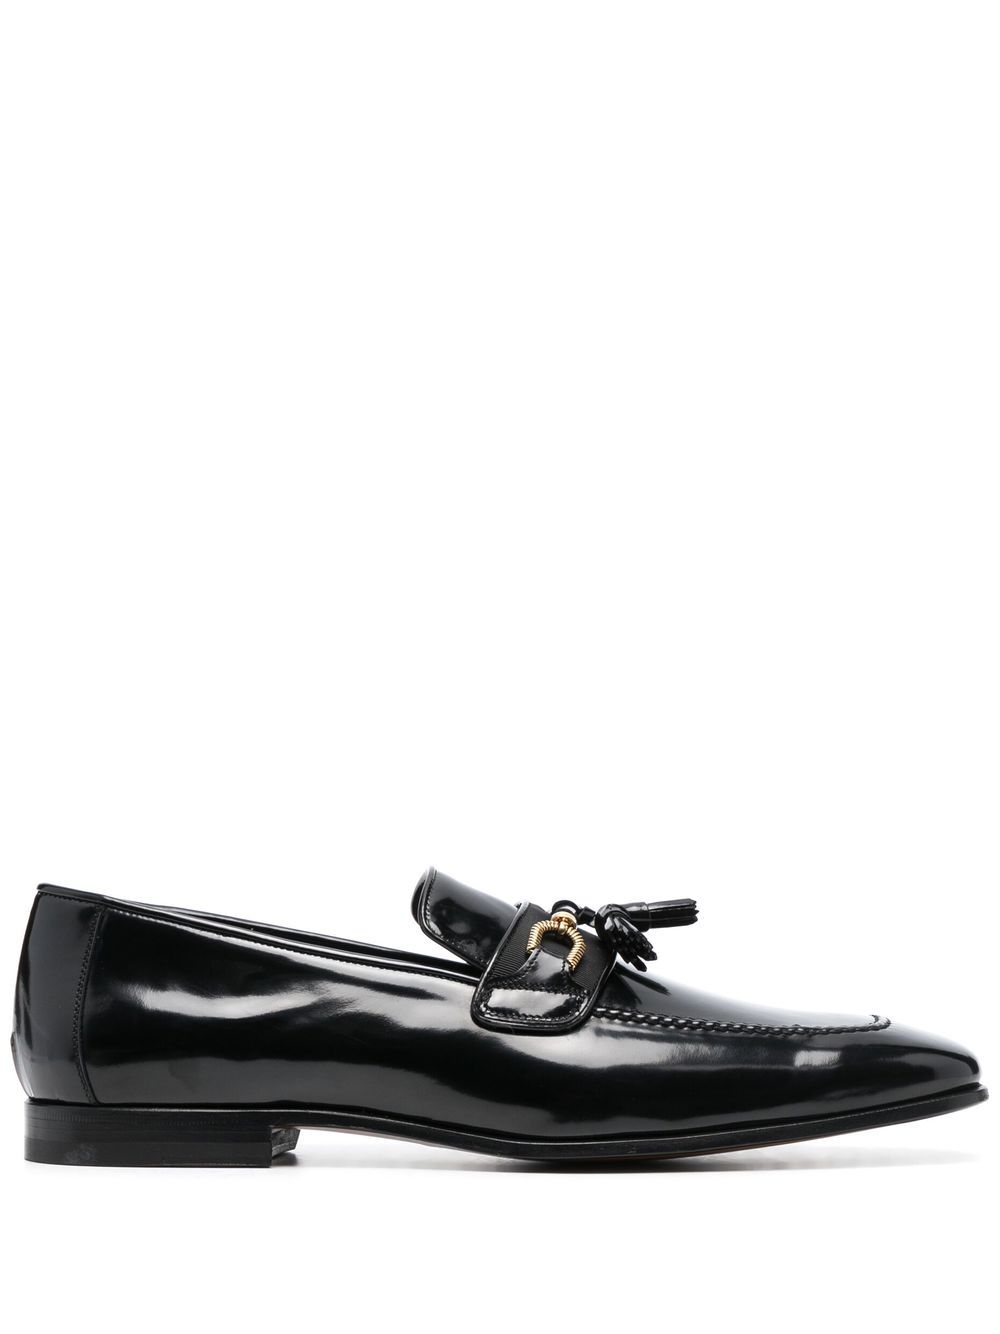 TOM FORD horsebit-detail Leather Loafers - Farfetch